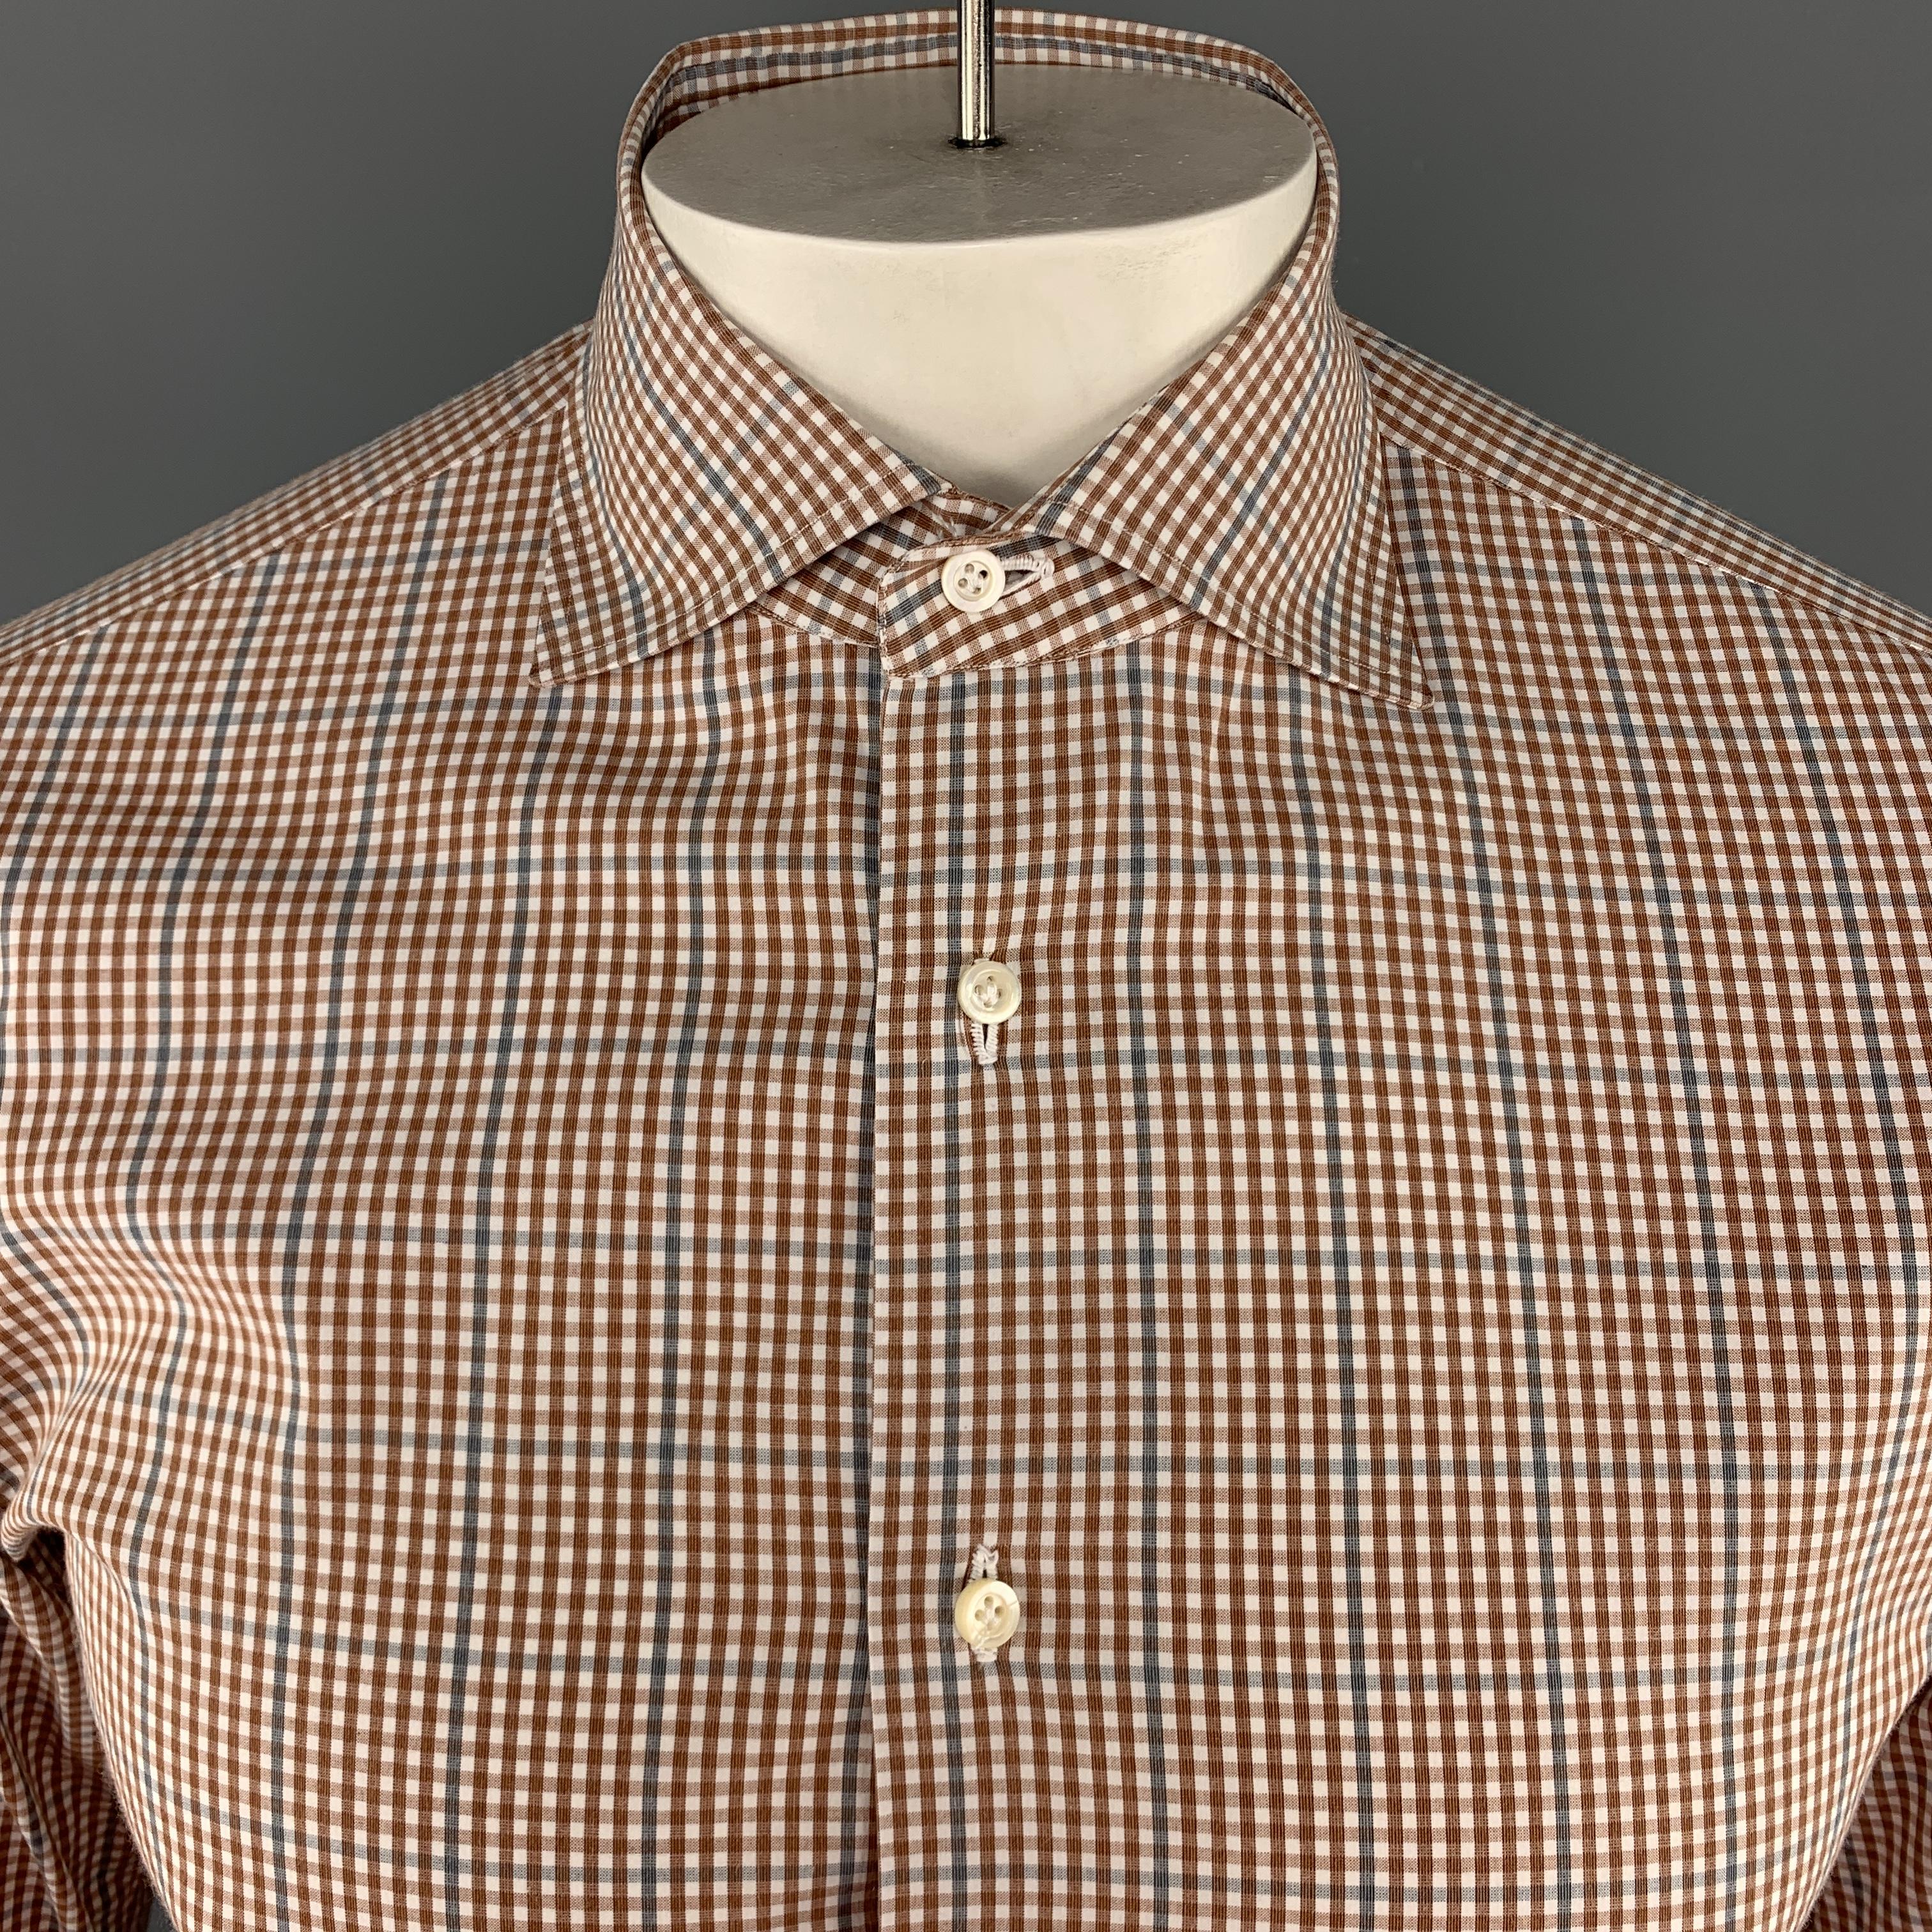 ISAIA Long Sleeve Shirt comes in brick and white tones in a plaid cotton material, with a spread collar, buttoned cuffs, button up. Made in Italy.

Excellent Pre-Owned Condition.
Marked: IT 39

Measurements:

Shoulder: 16 in. 
Chest: 42 in. 
Length: